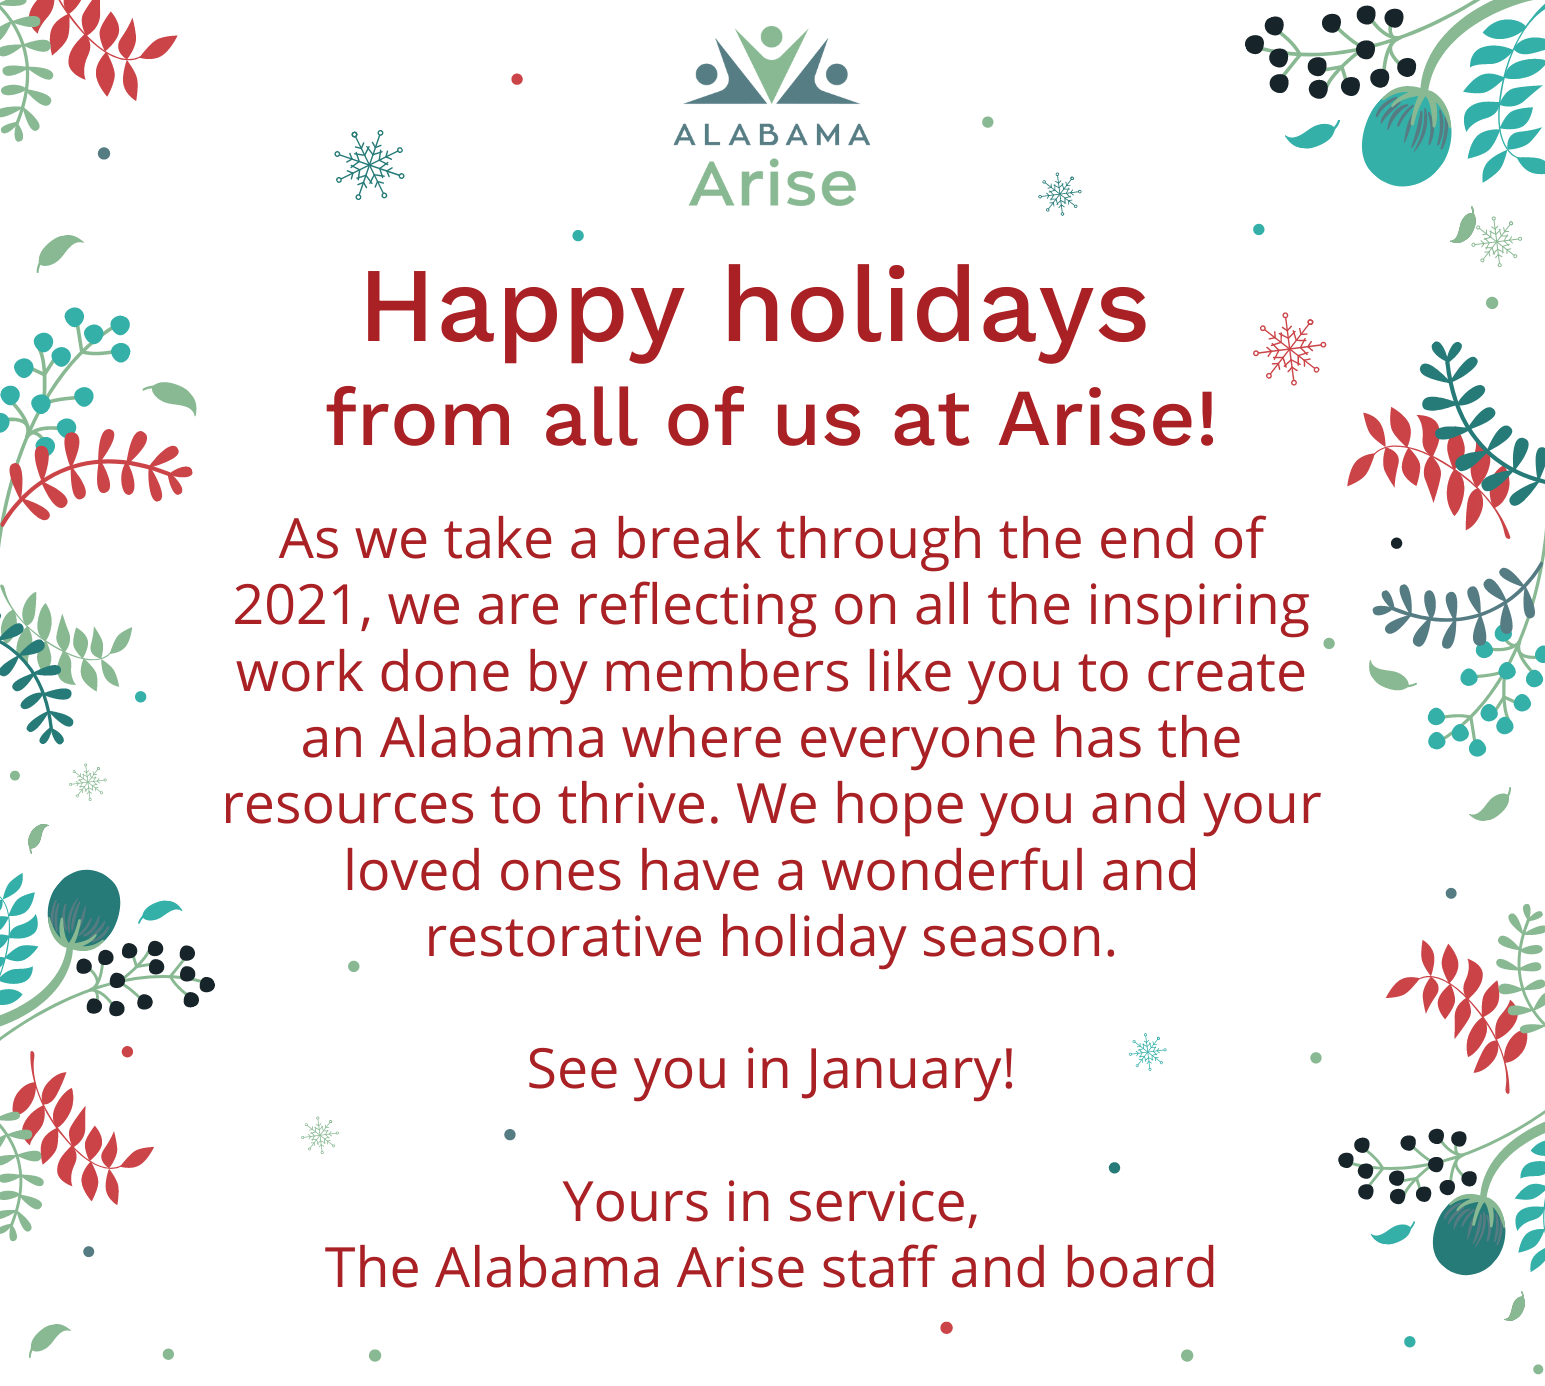 Happy holidays from all of us at Arise!As we take a break through the end of 2021, we are reflecting on all the inspiring work done by members like you to create an Alabama where everyone has the resources to thrive. We hope you and your loved ones have a wonderful and restorative holiday season.See you in January!Yours in service,The Alabama Arise staff and board